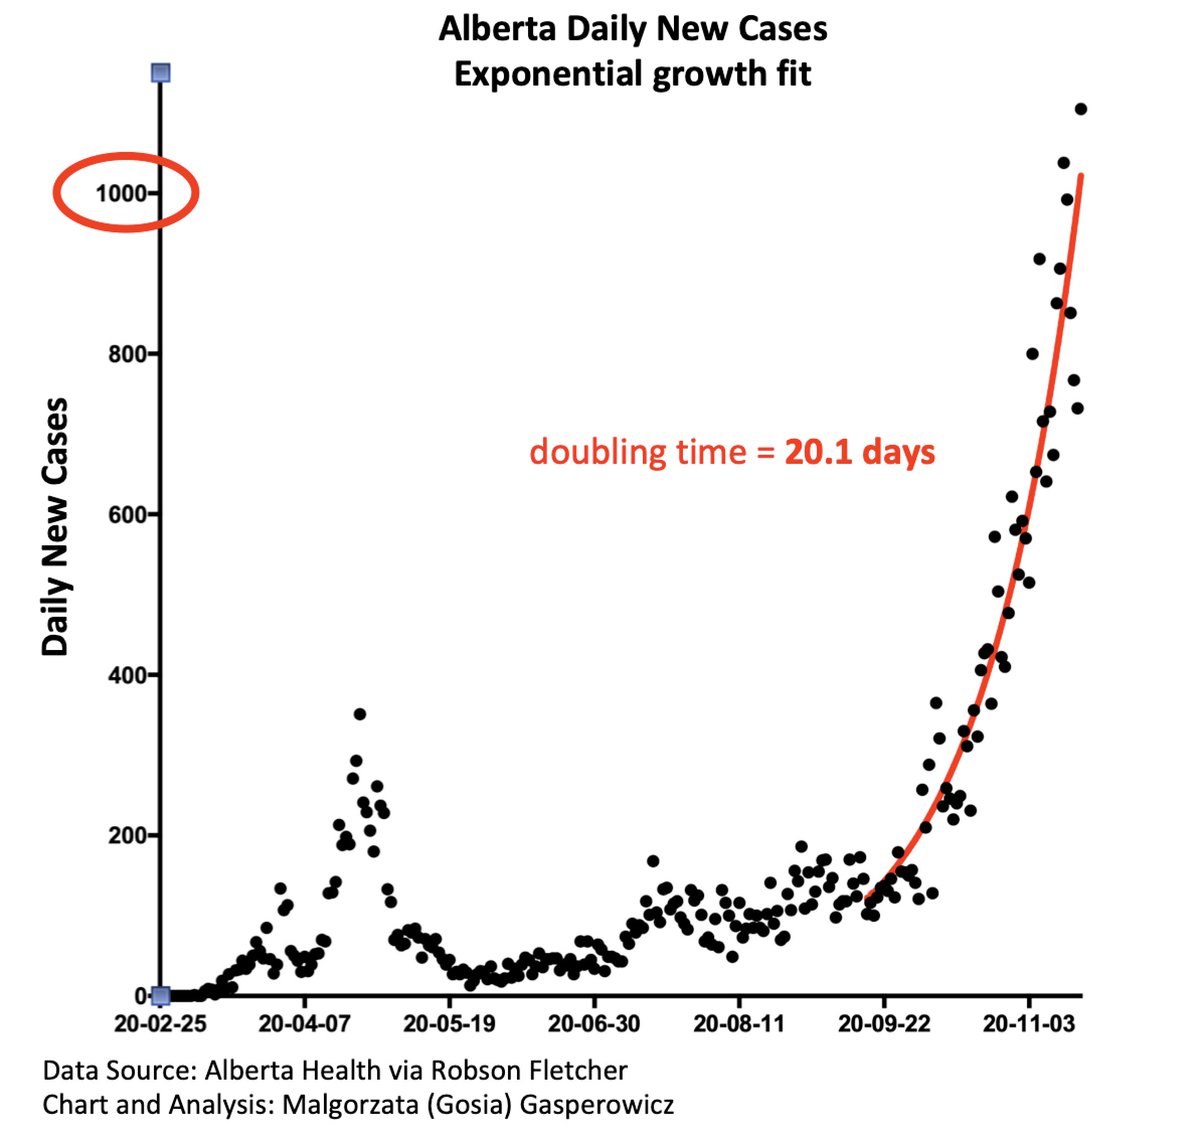 Alberta: COVID-19 spreads exponentiallyDaily new cases doubling time is ~ 3 weeksWe are already at a *1,000* daily At this rate we will have:Dec 08, 2200+ daily new casesDec 28, 4400+ daily new casesJan 17, 8800+ daily new cases"The Nightmare for Christmas" 1/